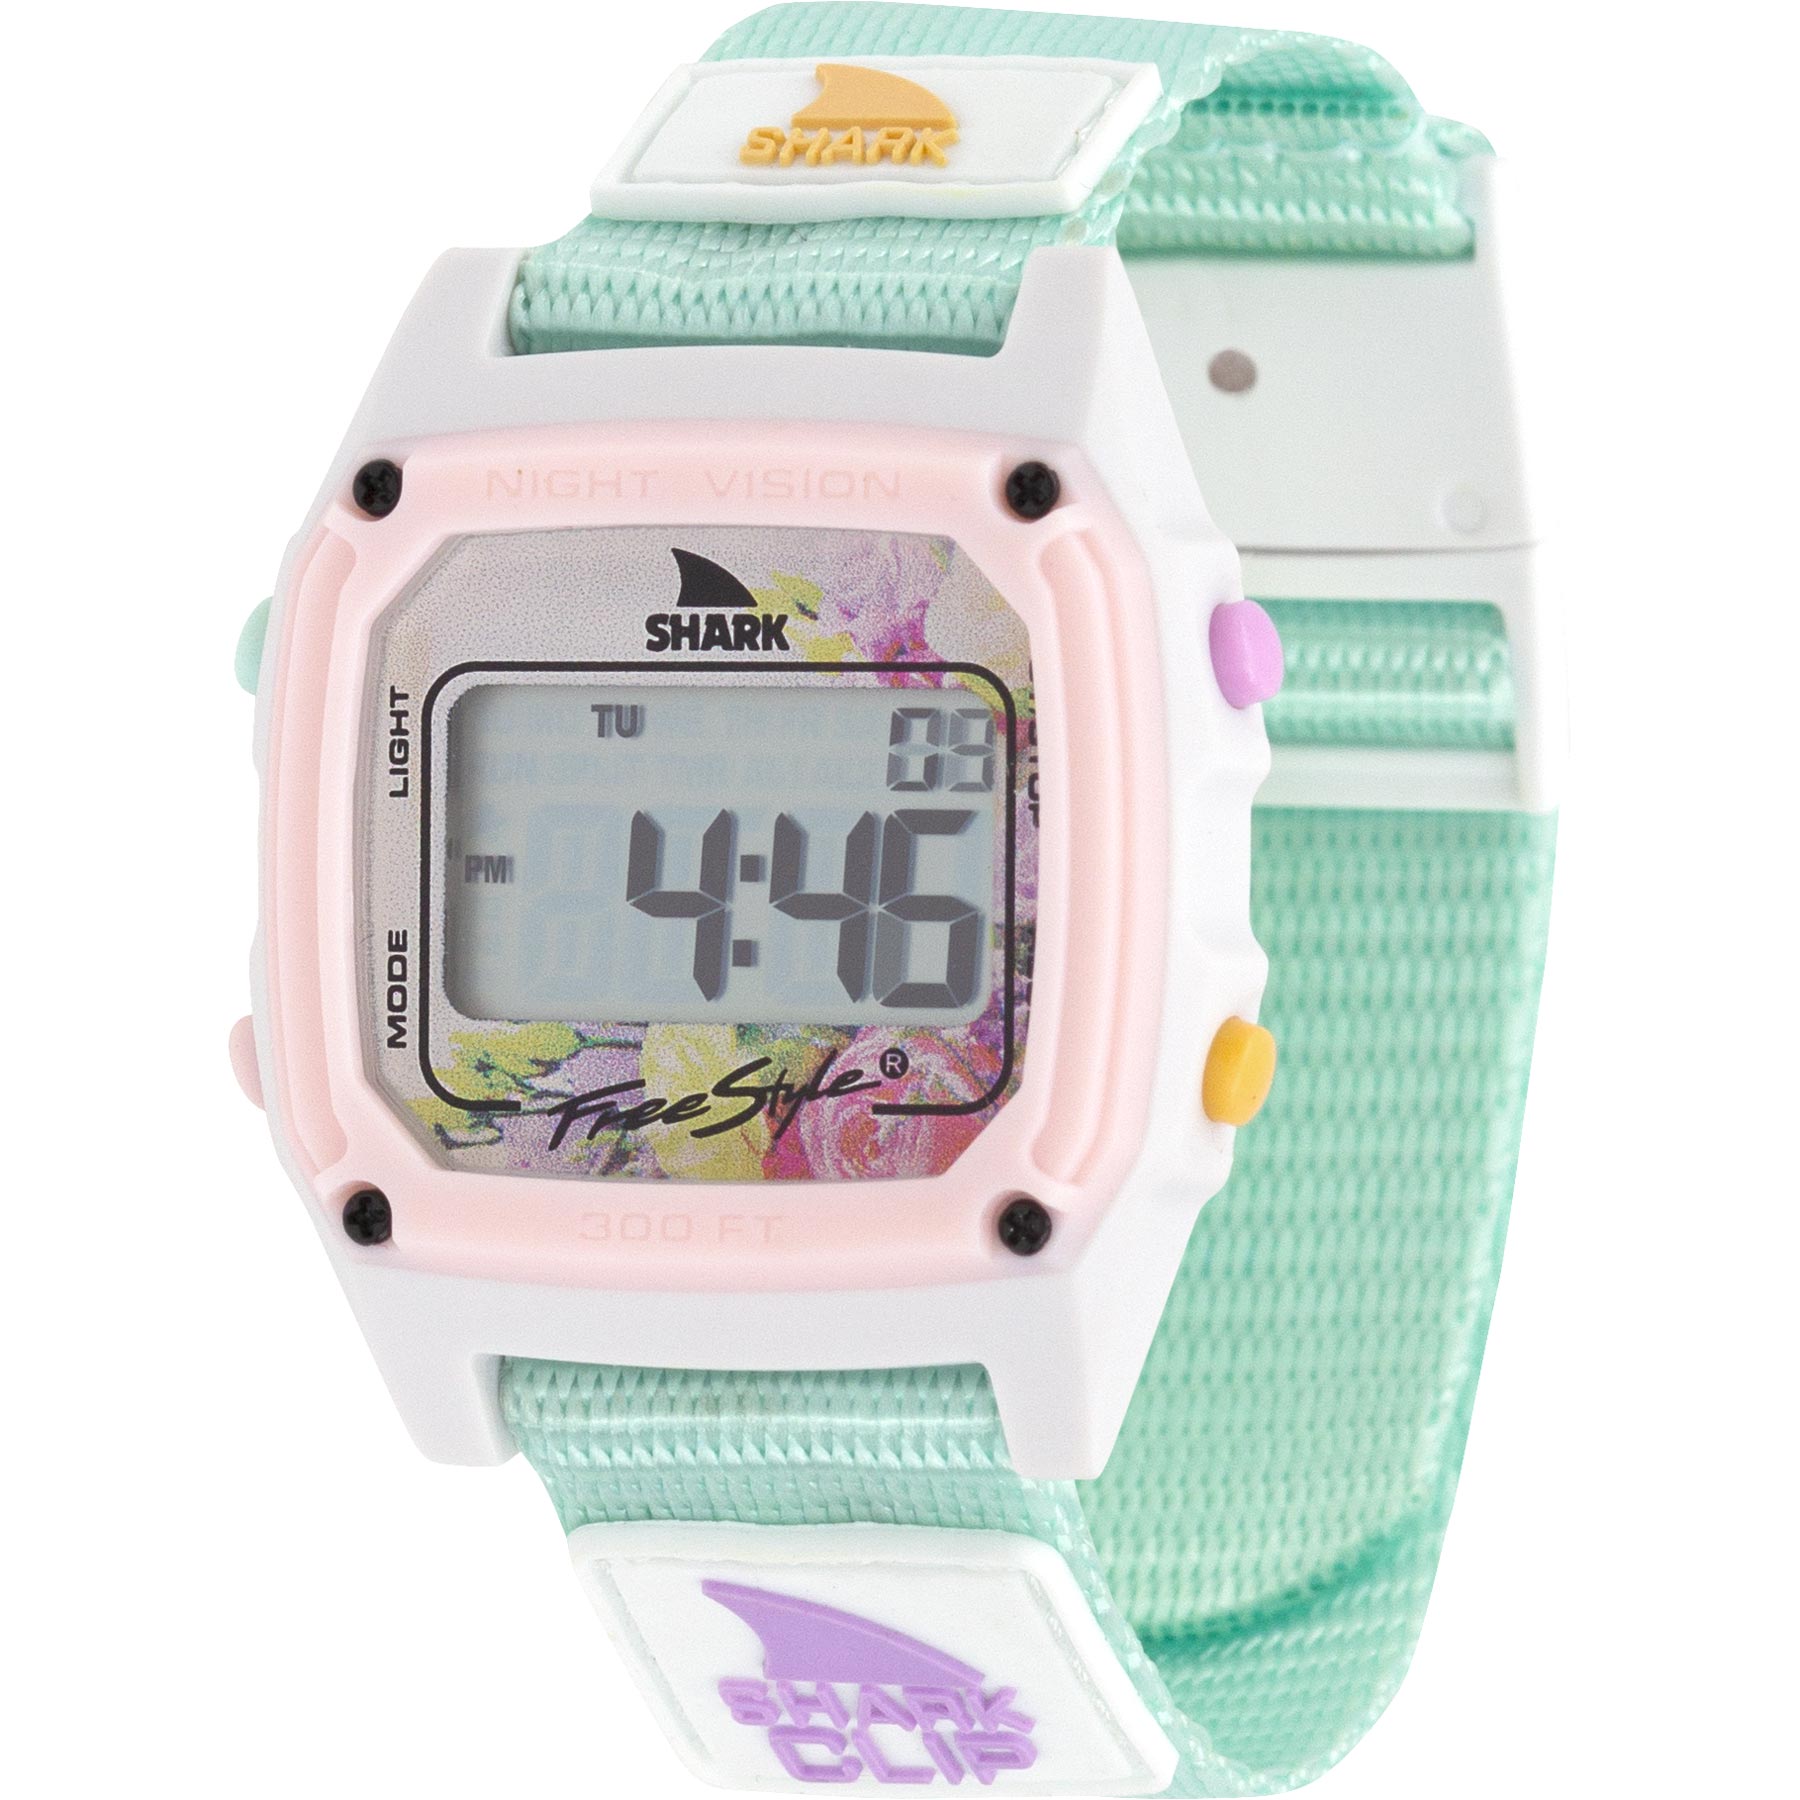 Freestyle Watches Shark Classic Clip Mint Blush Unisex Watch 